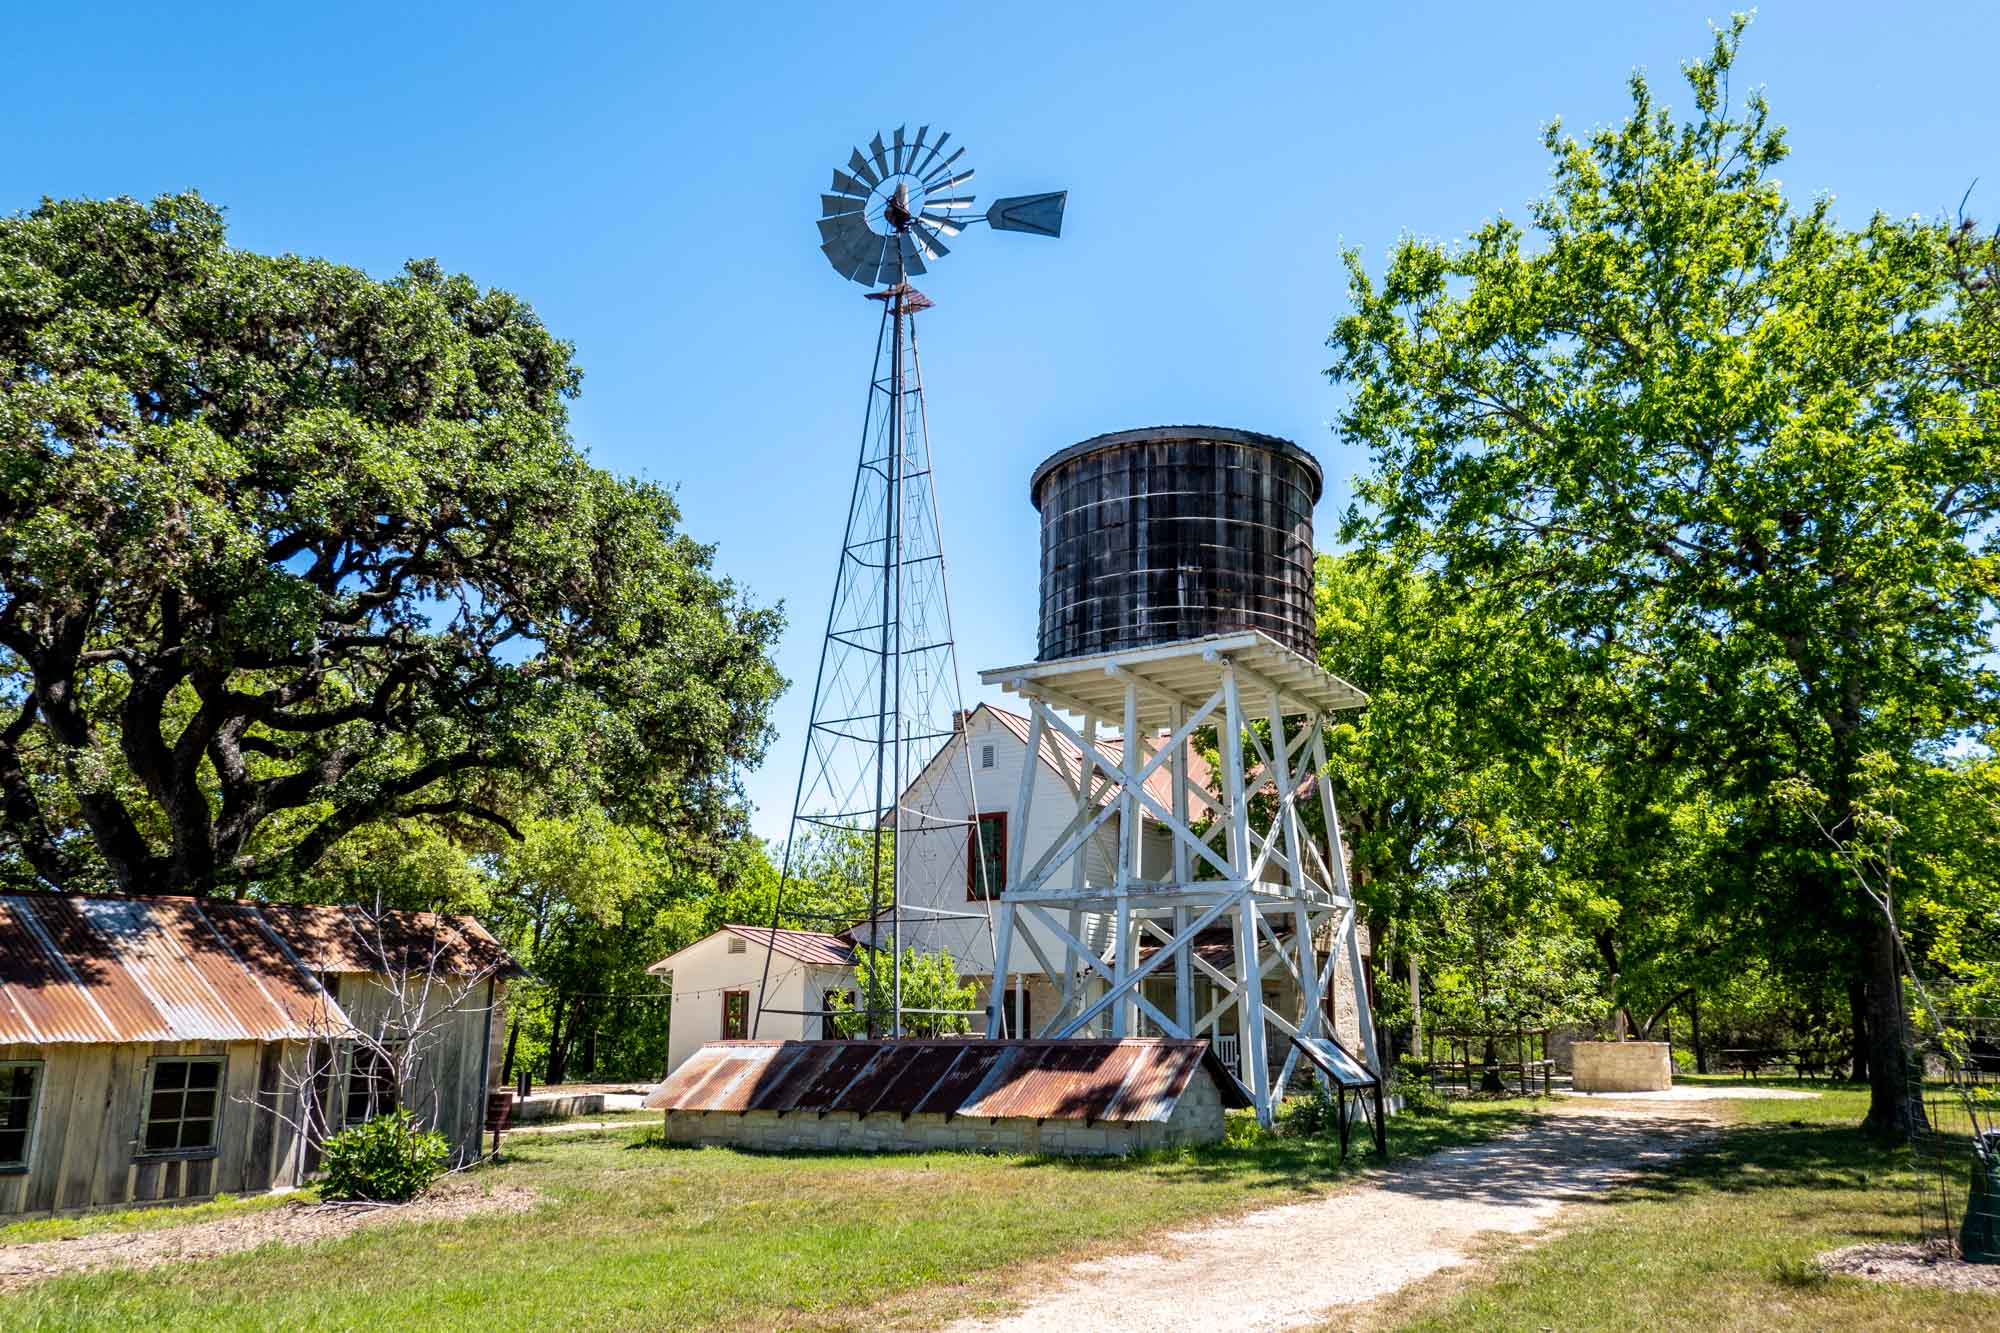 Windmill, wooden water tower, and old buildings on a sunny day